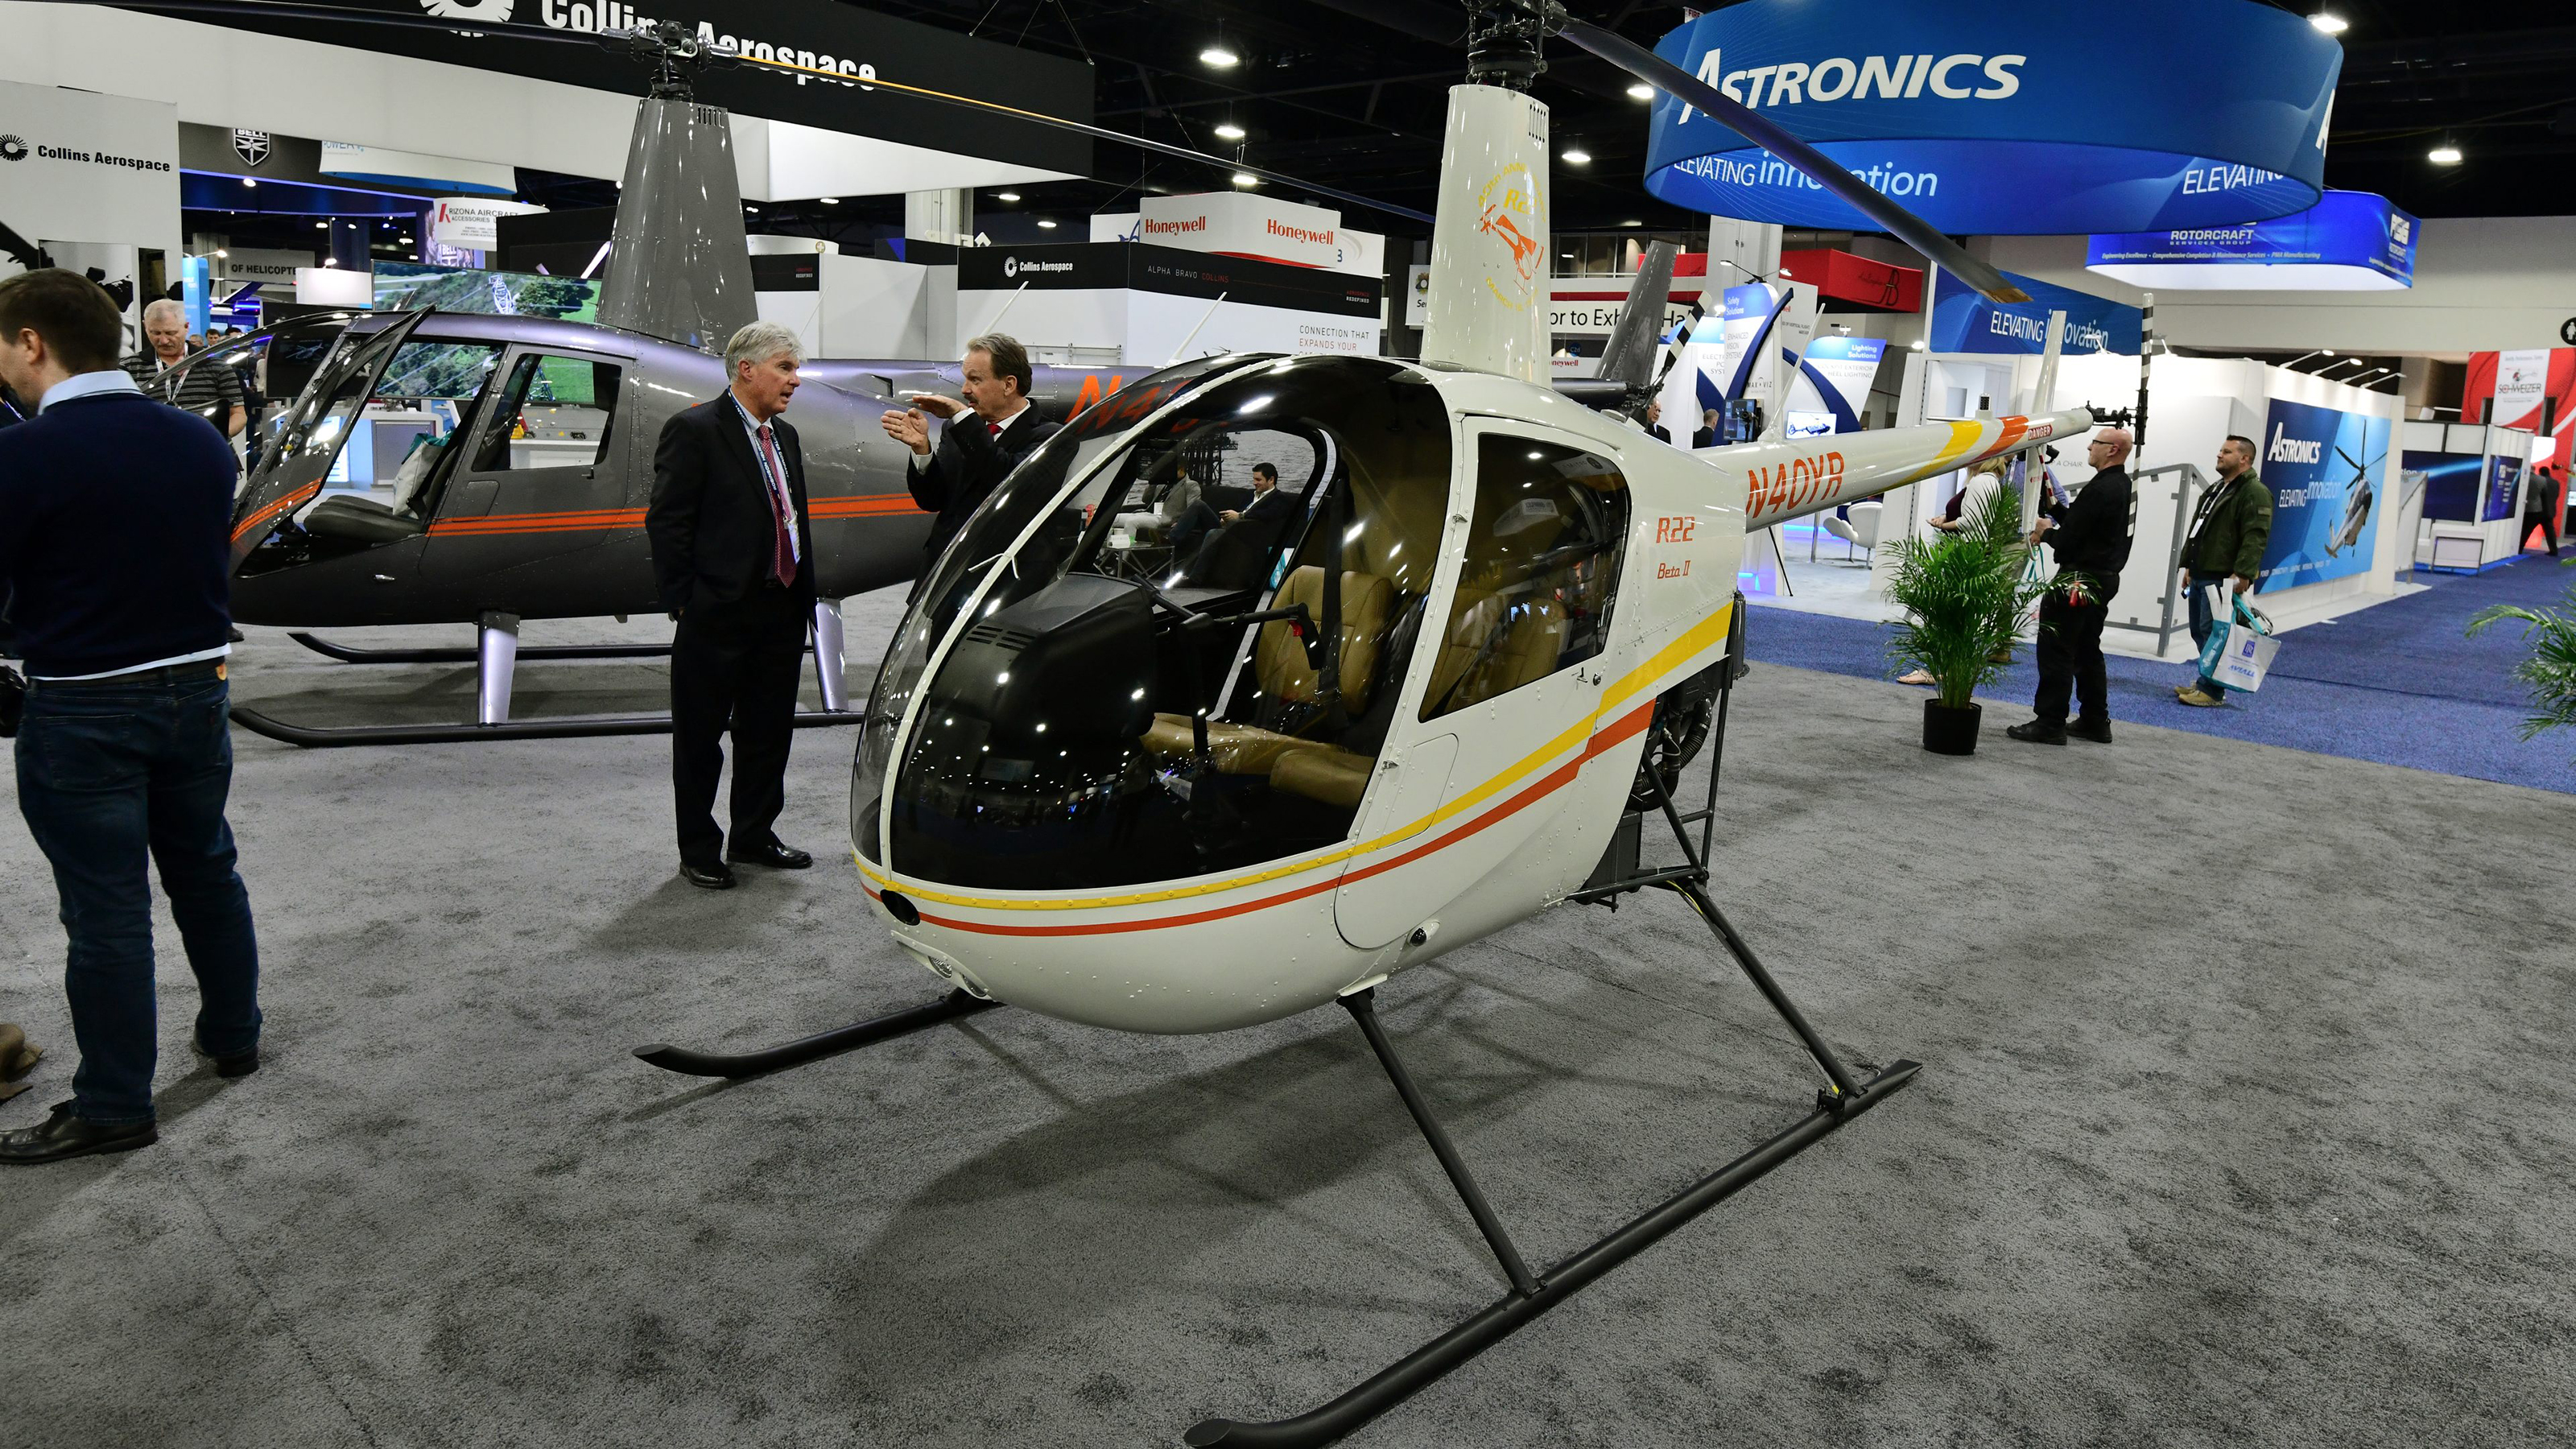 new robinson r22 for sale